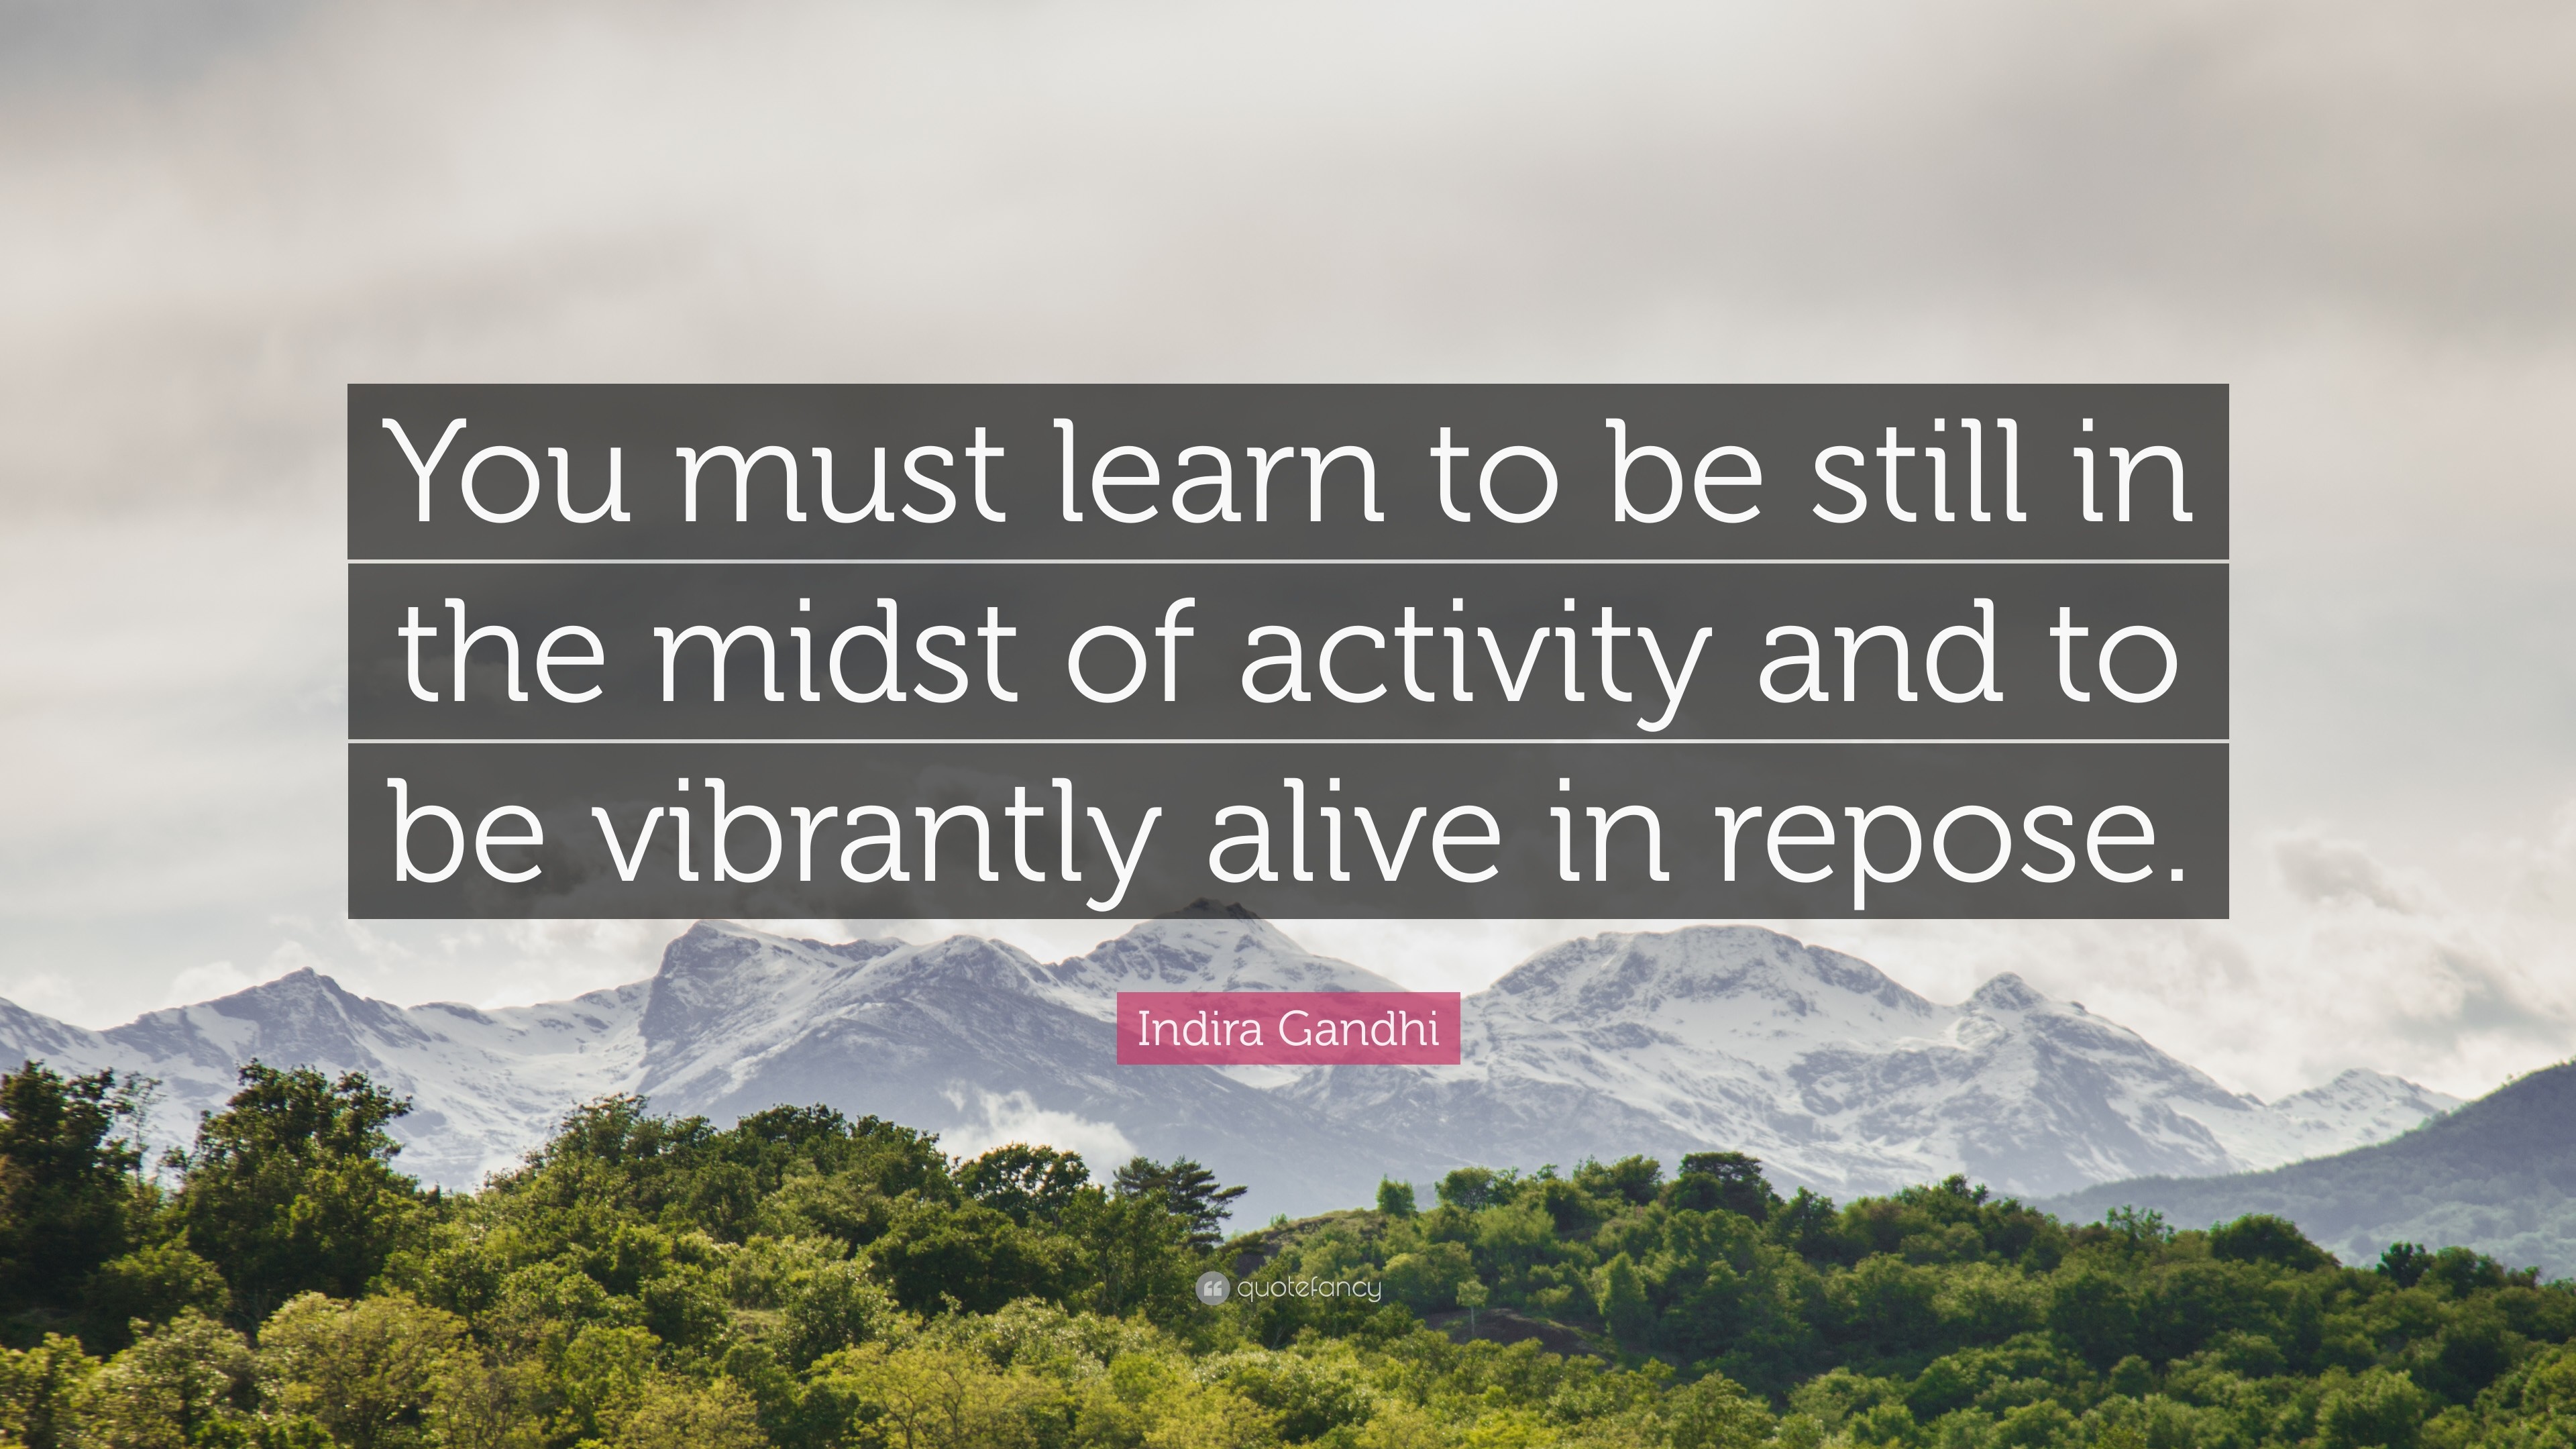 3840x2160 Indira Gandhi Quote: “You must learn to be still in the midst of activity